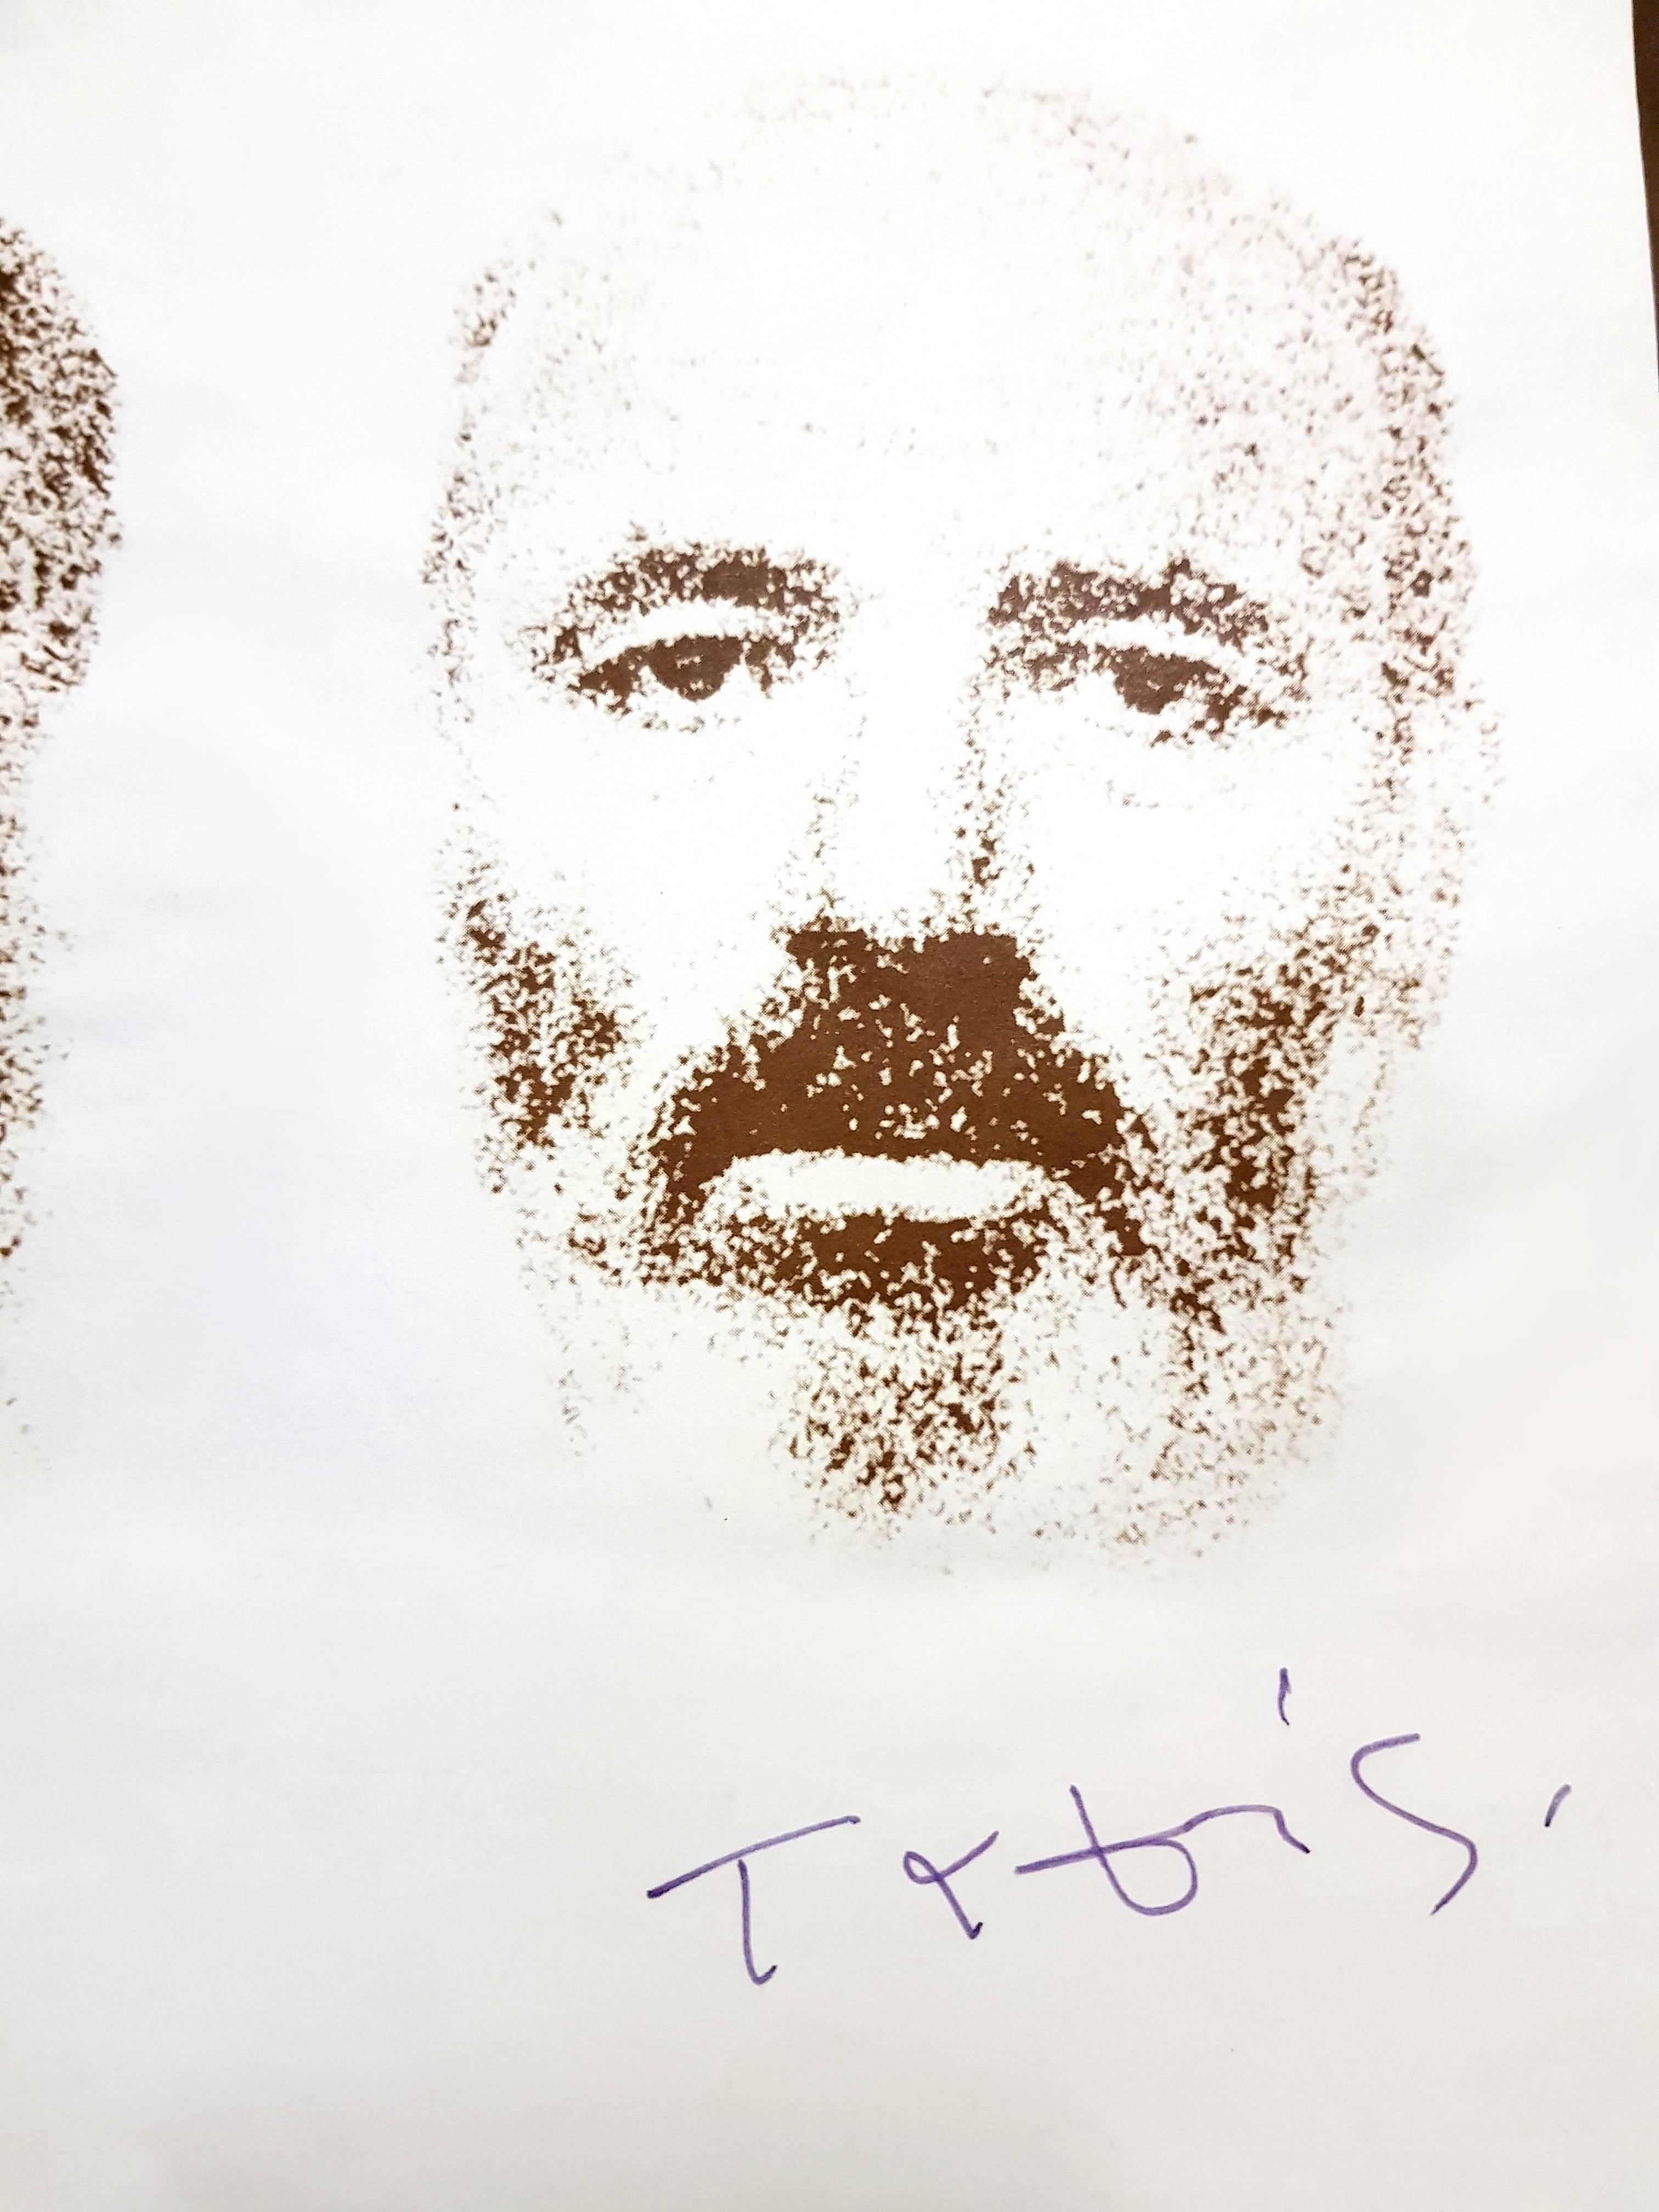 César, Arman, Takis - Signed Original Exhibition Poster - Signed by All - Art by César Baldaccini